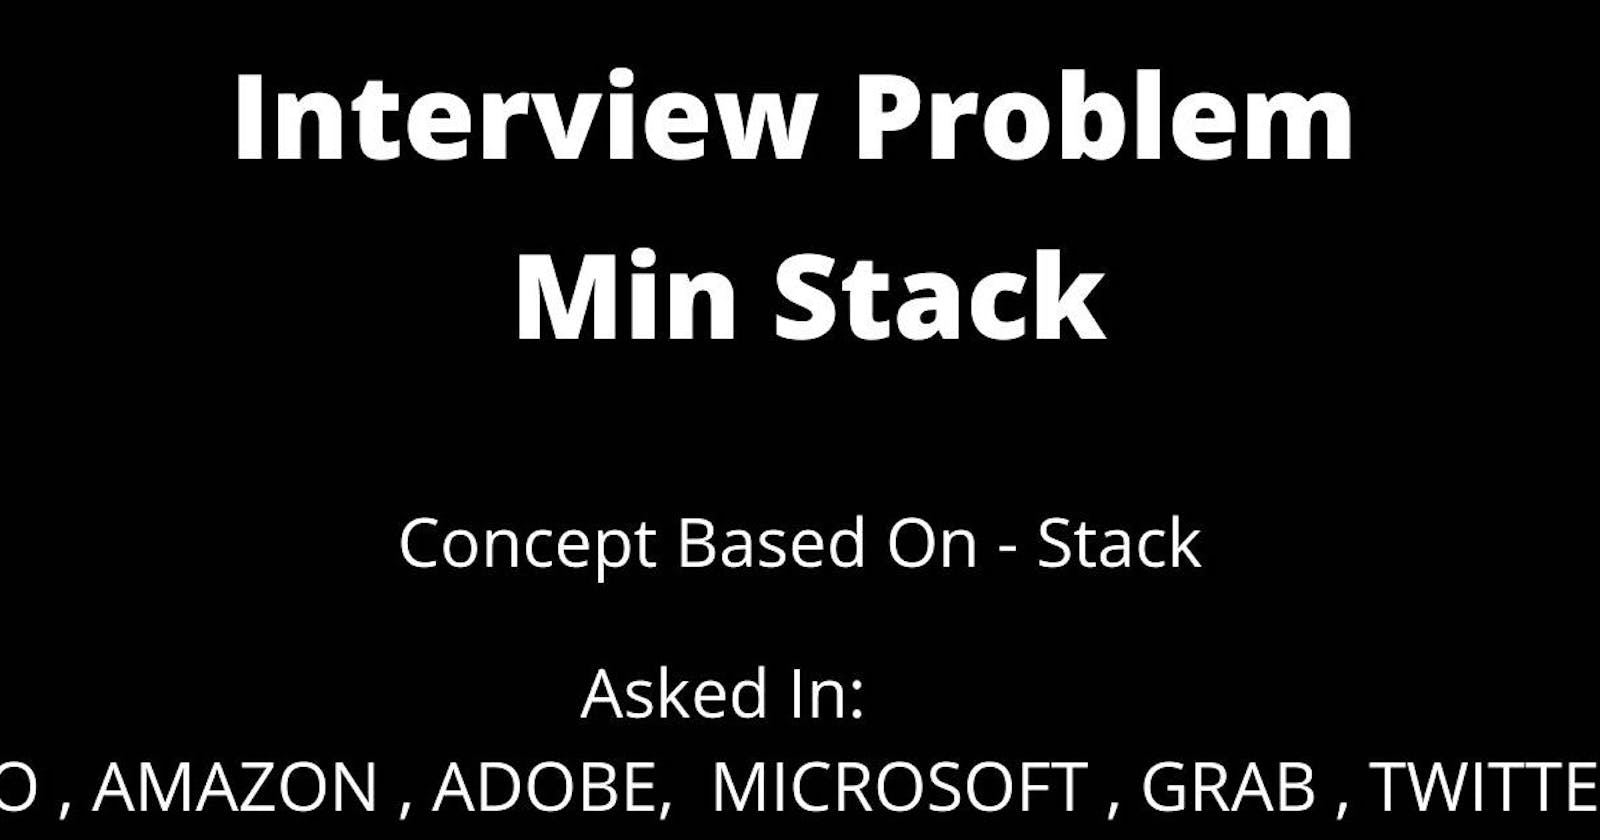 Min Stack - Interview Bit Solution, Problem is based on Stack Data Structure